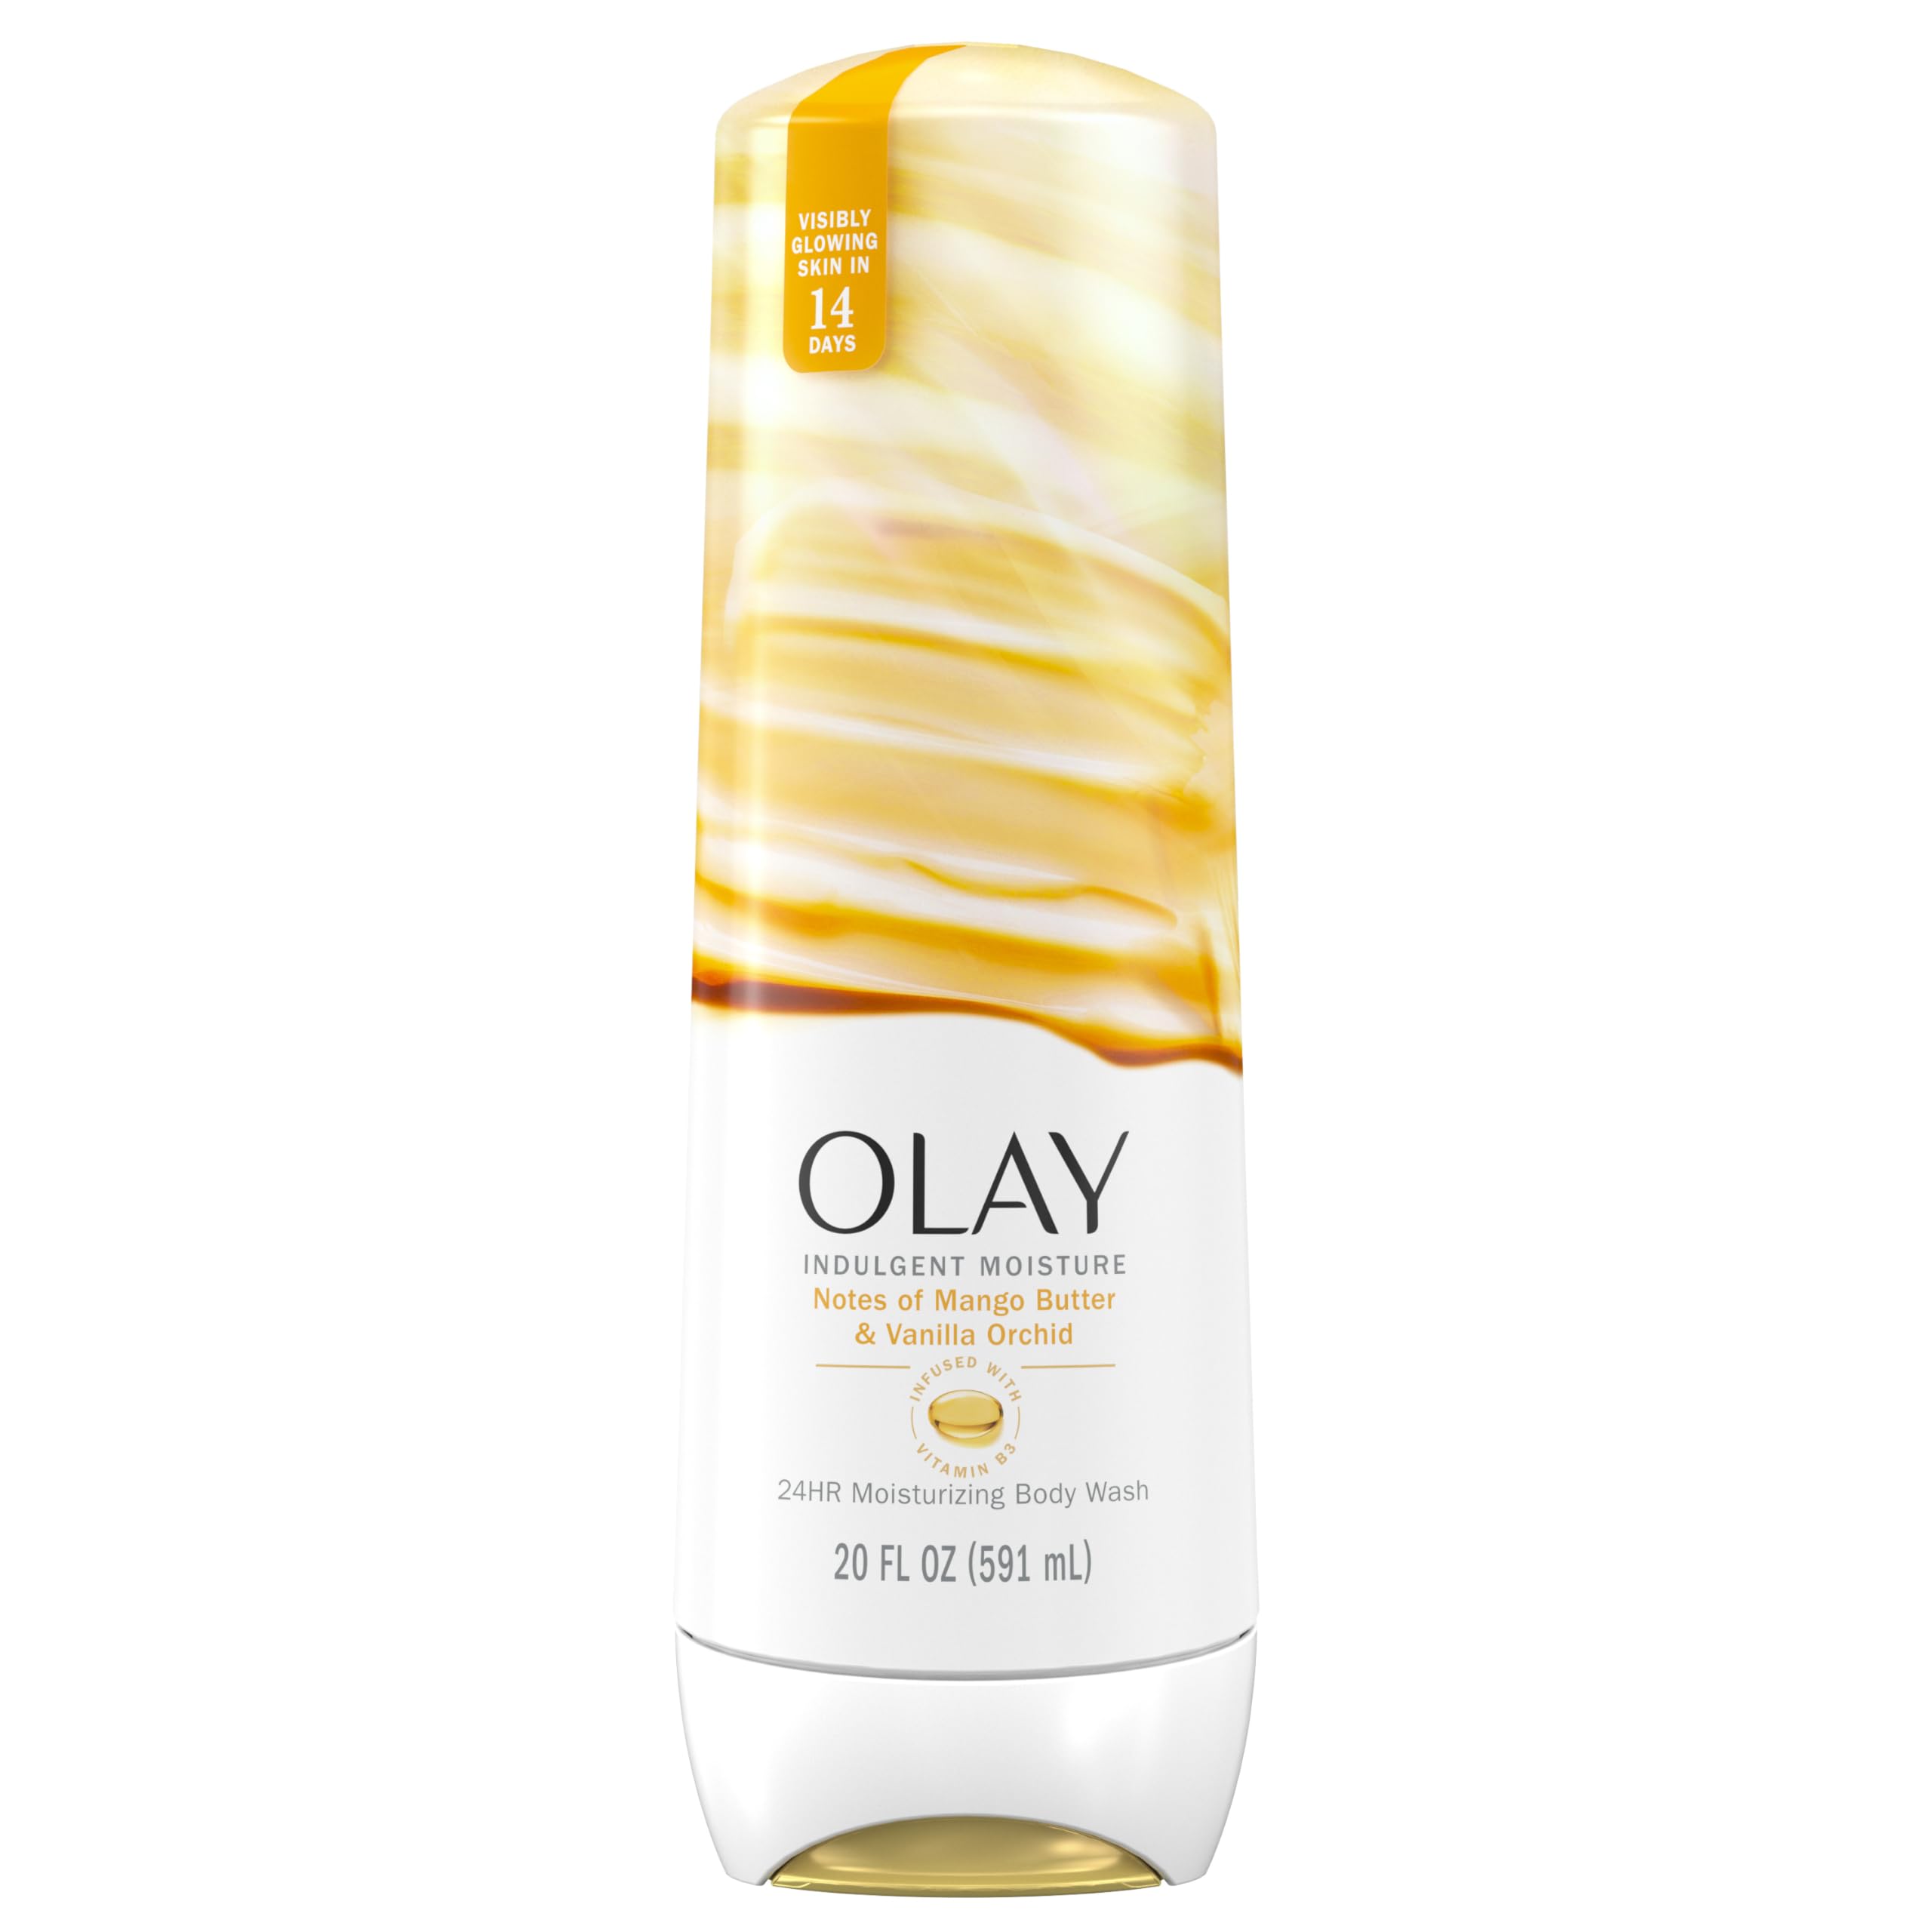 Olay Indulgent Moisture Body Wash for Women, Infused with Vitamin B3, Notes of Mango Butter and Vanilla Orchid Scent, 20 fl oz